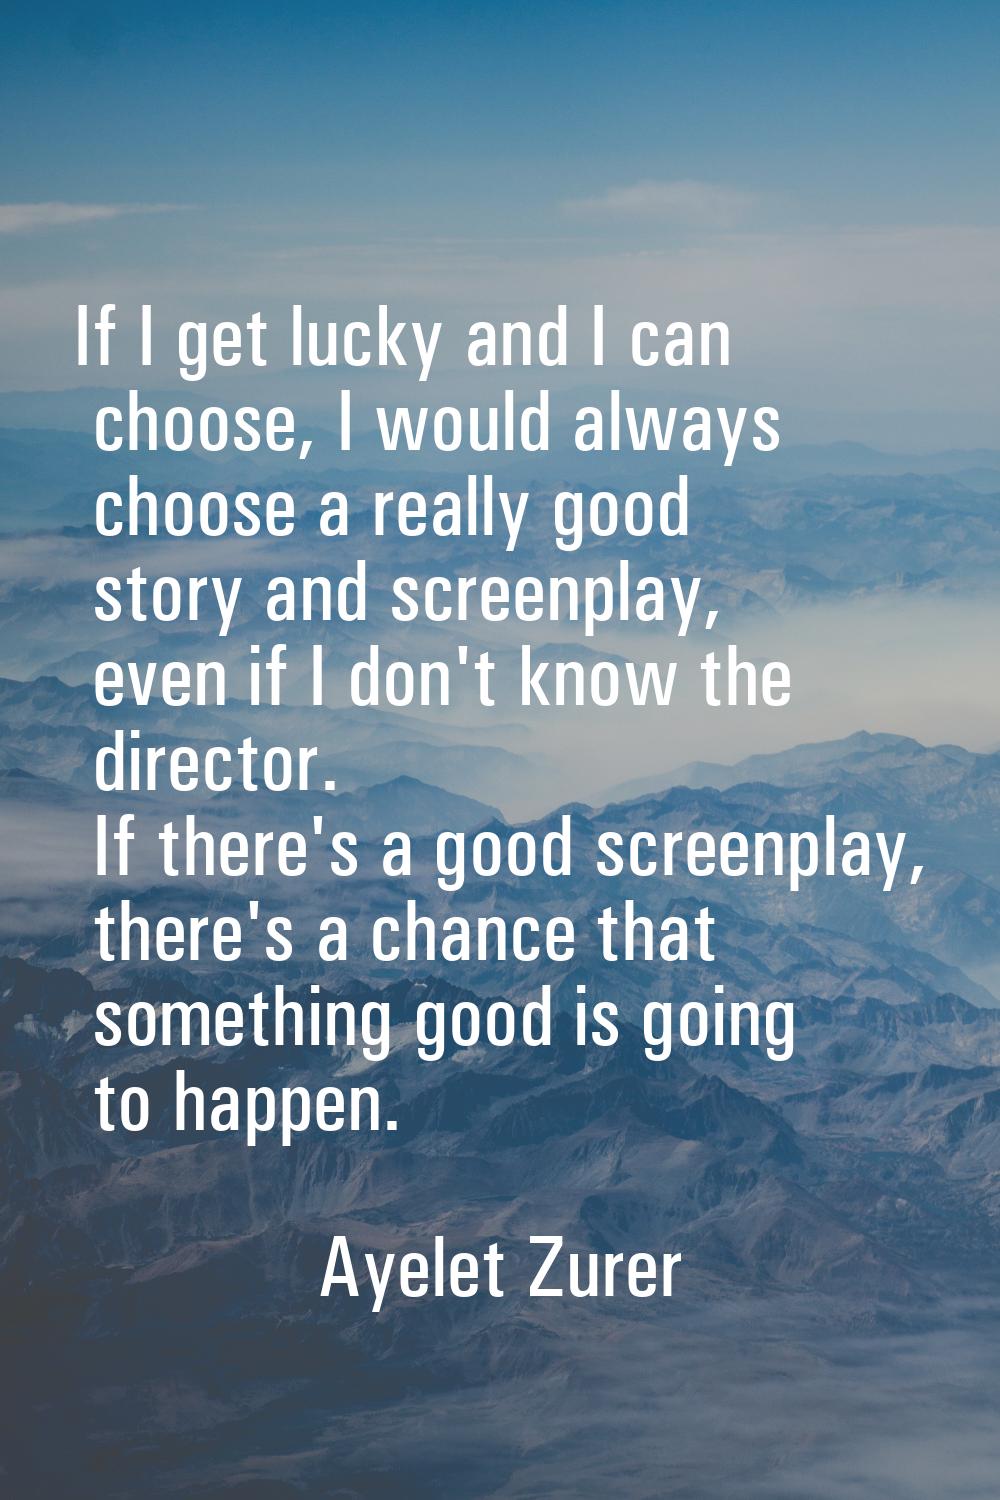 If I get lucky and I can choose, I would always choose a really good story and screenplay, even if 